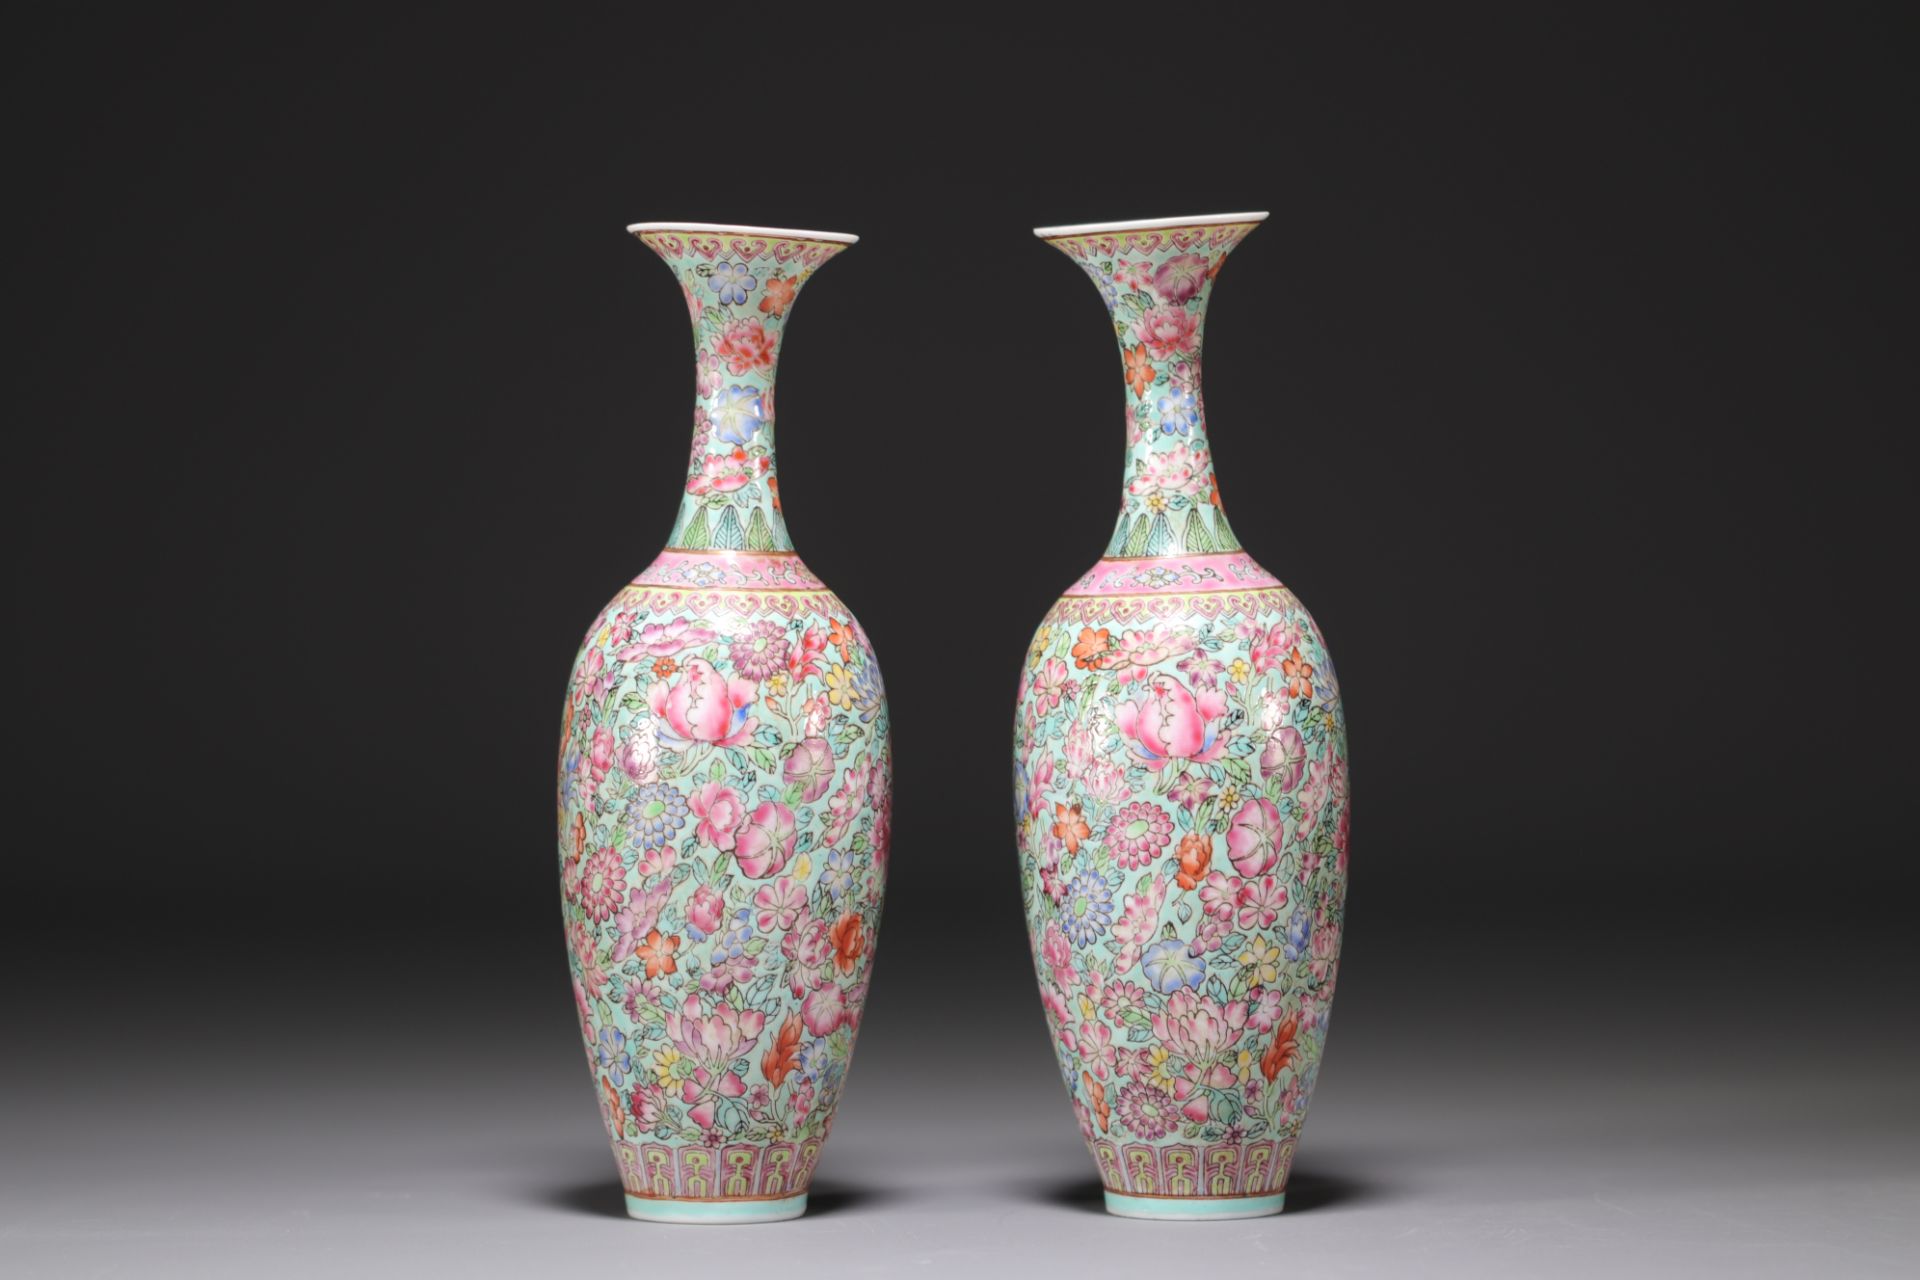 China - A pair of eggshell porcelain vases with floral decoration. - Image 4 of 5